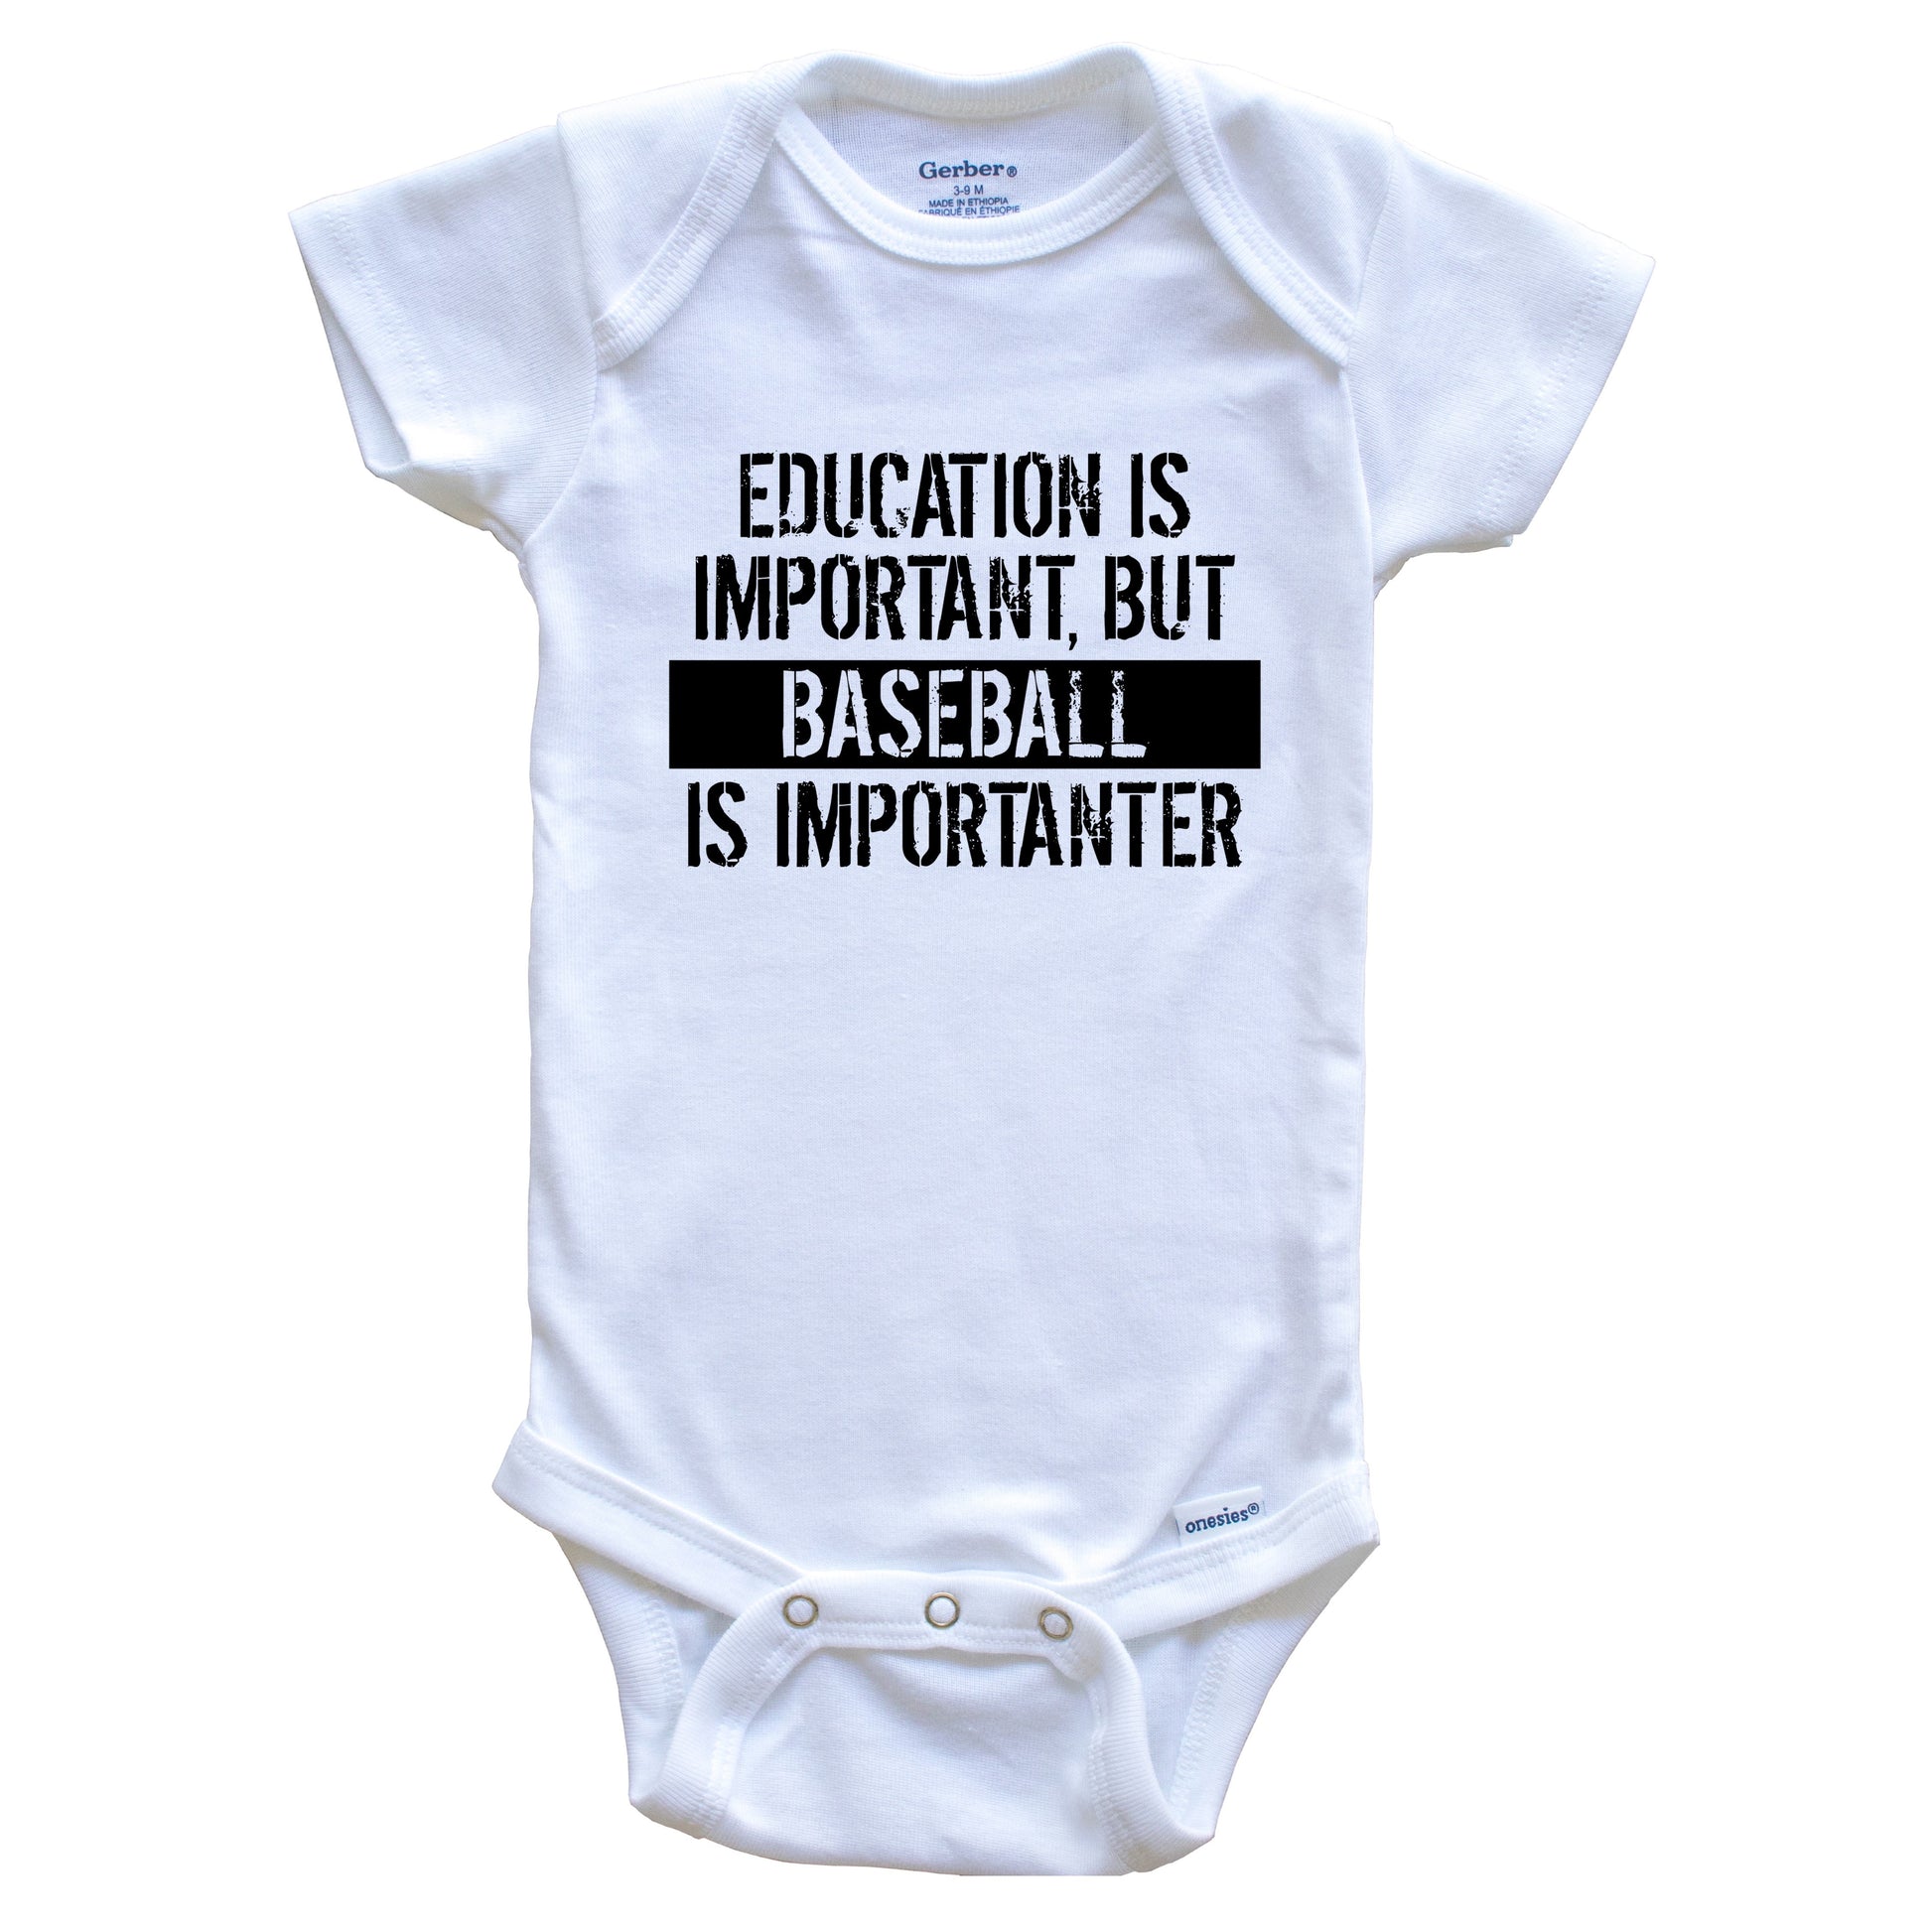 Education Is Important But Baseball Is Importanter Funny Baby Onesie